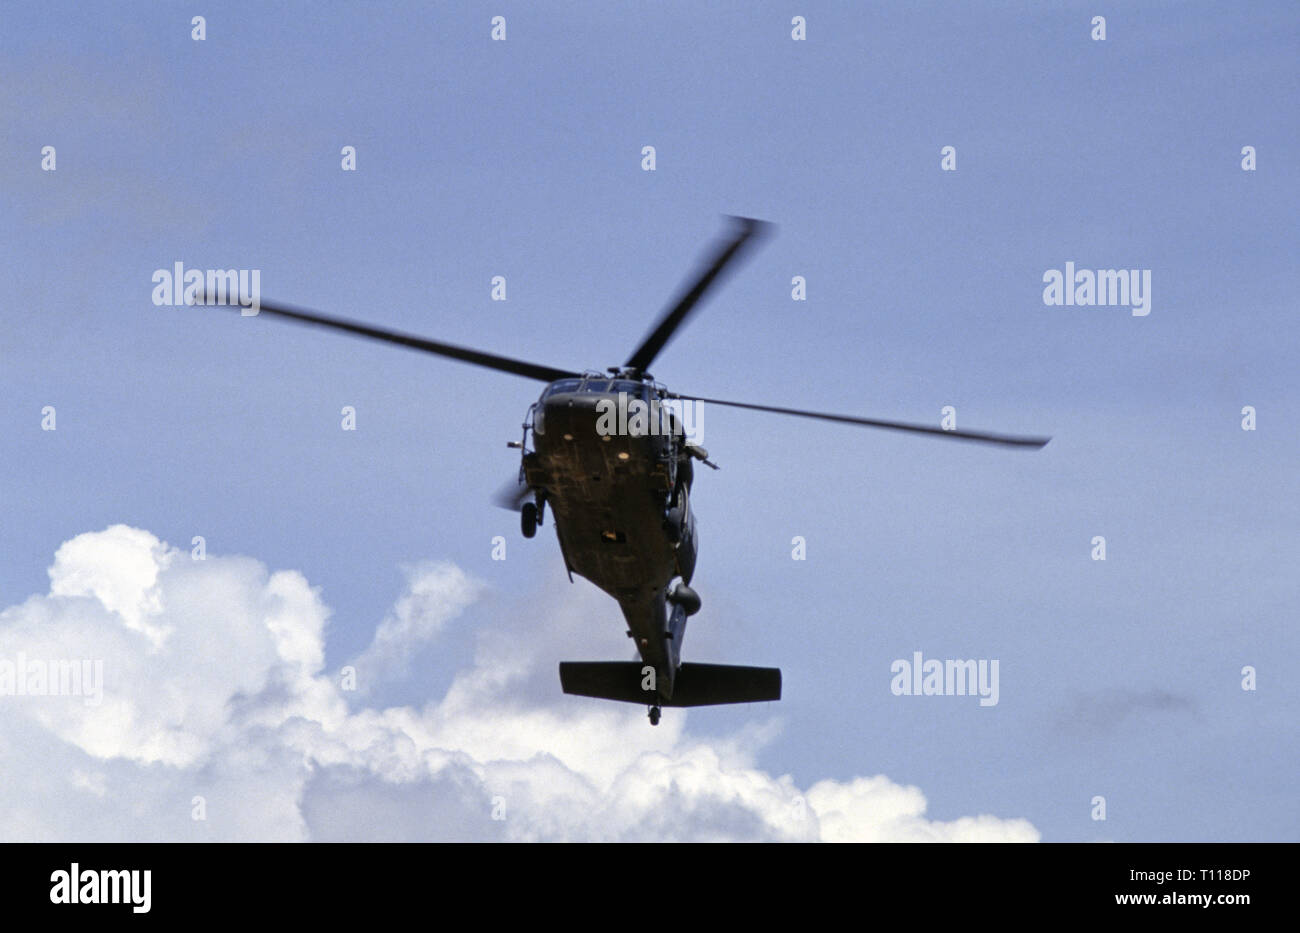 29th October 1993 A U.S. Army Sikorsky UH-60 Black Hawk helicopter coming in to land at the UNOSOM headquarters compound in Mogadishu, Somalia. Stock Photo